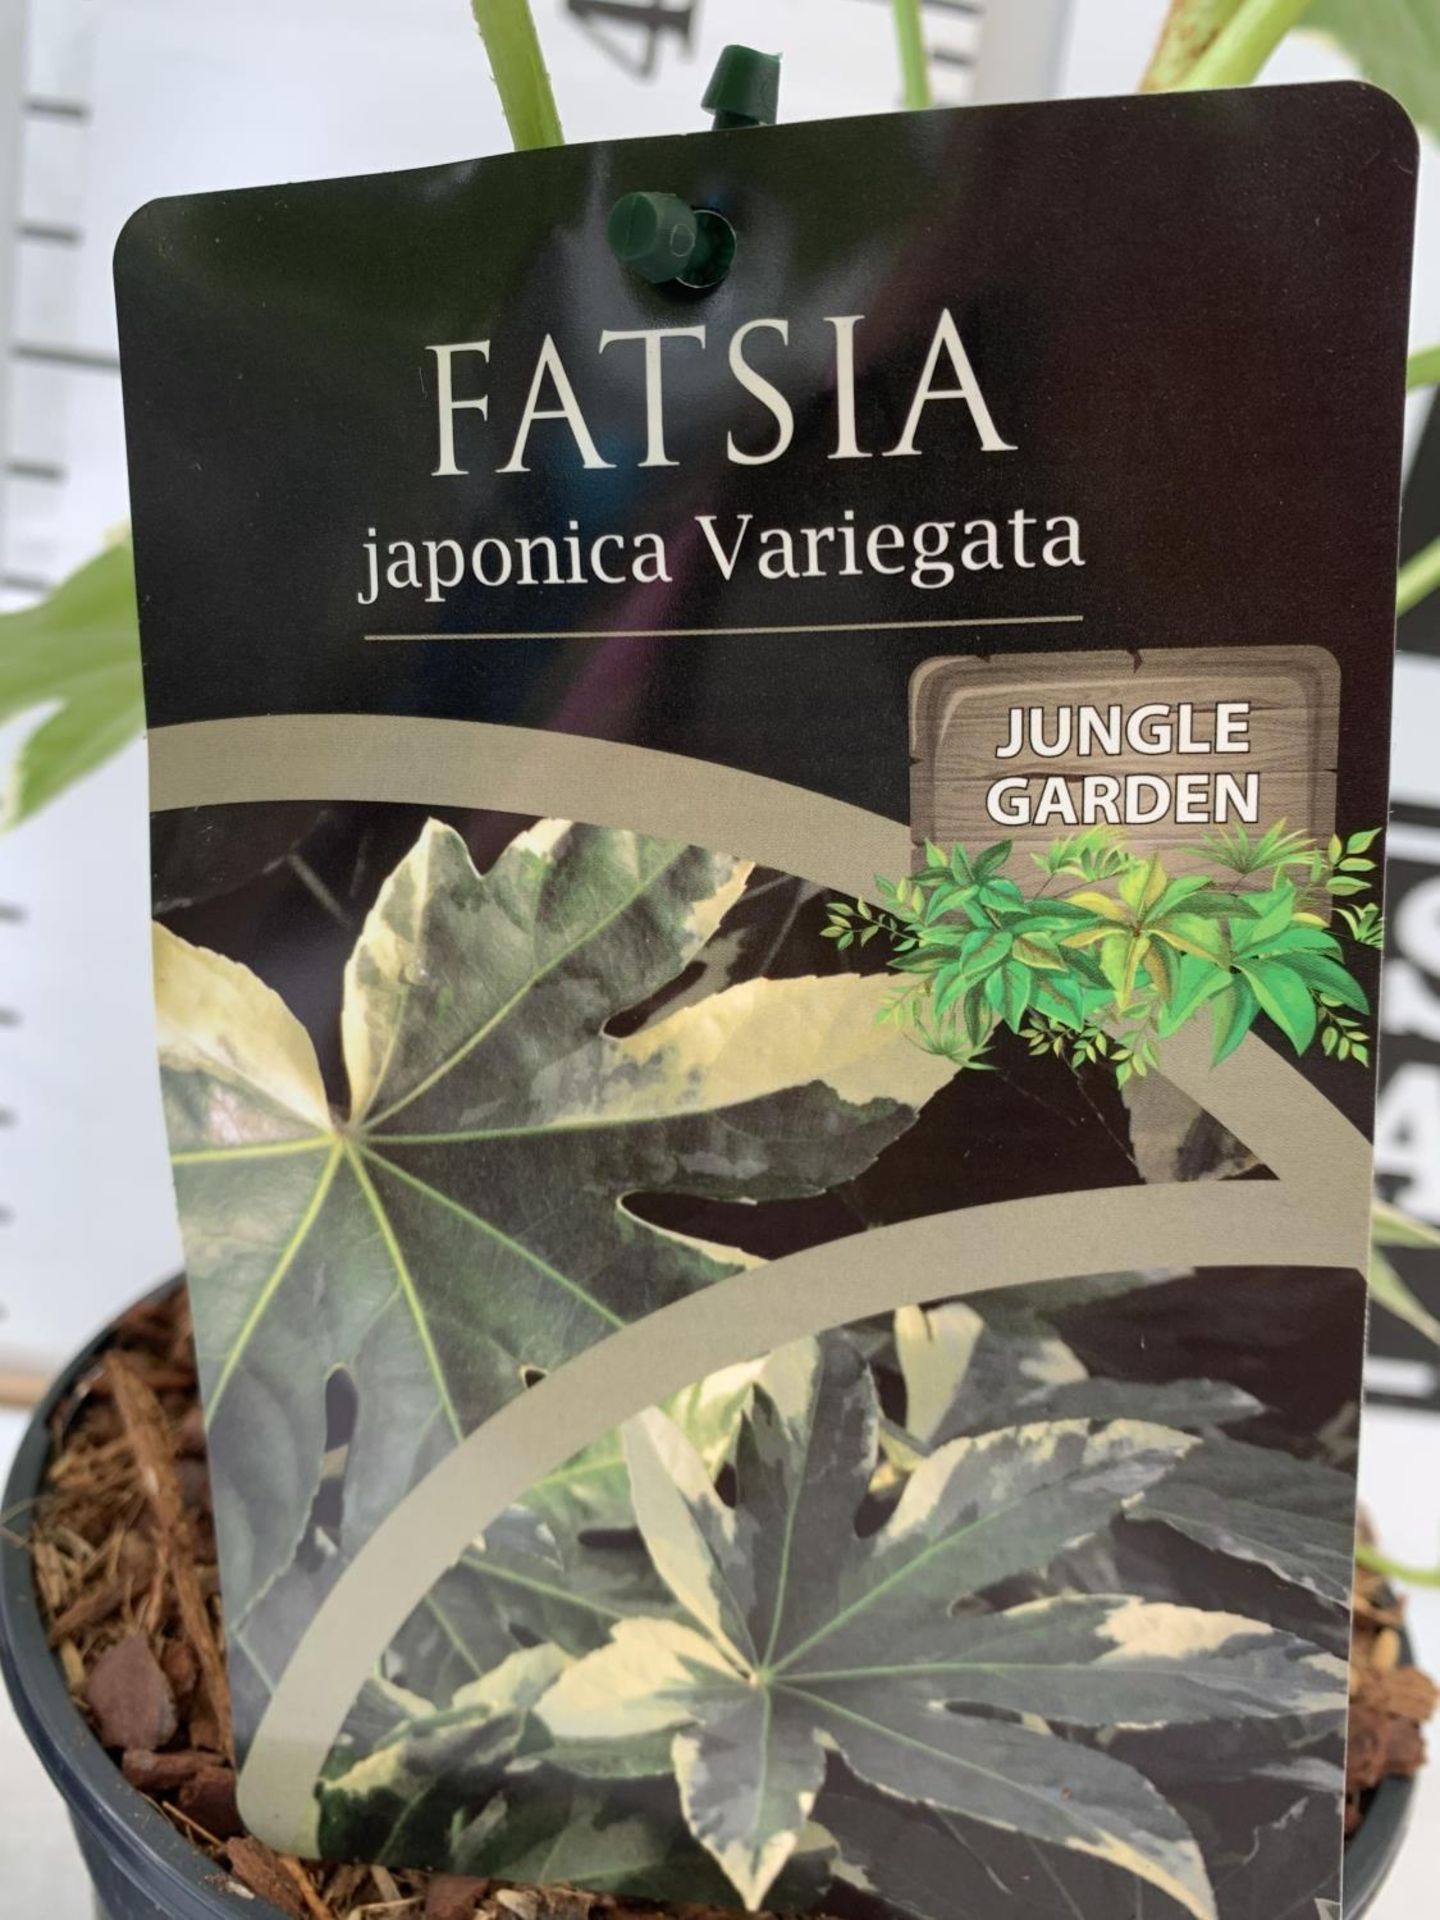 TWO FATSIA JUNGLE GARDEN JAPONICA VARIEGATA IN 2 LTR POTS 50CM TALL PLUS VAT TO BE SOLD FOR THE TWO - Image 8 of 10